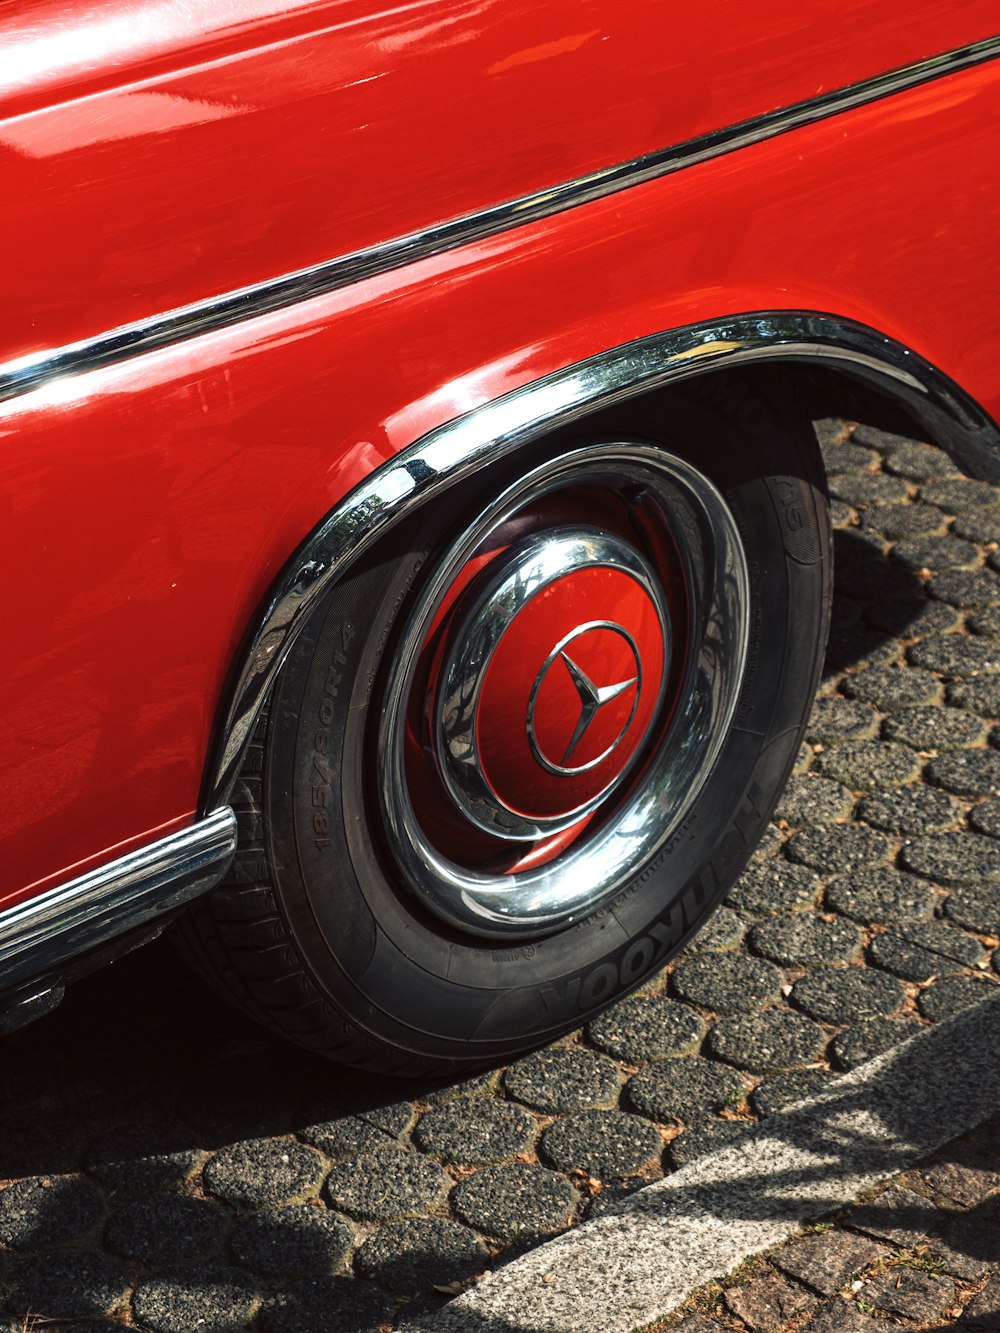 a close up of a red car tire